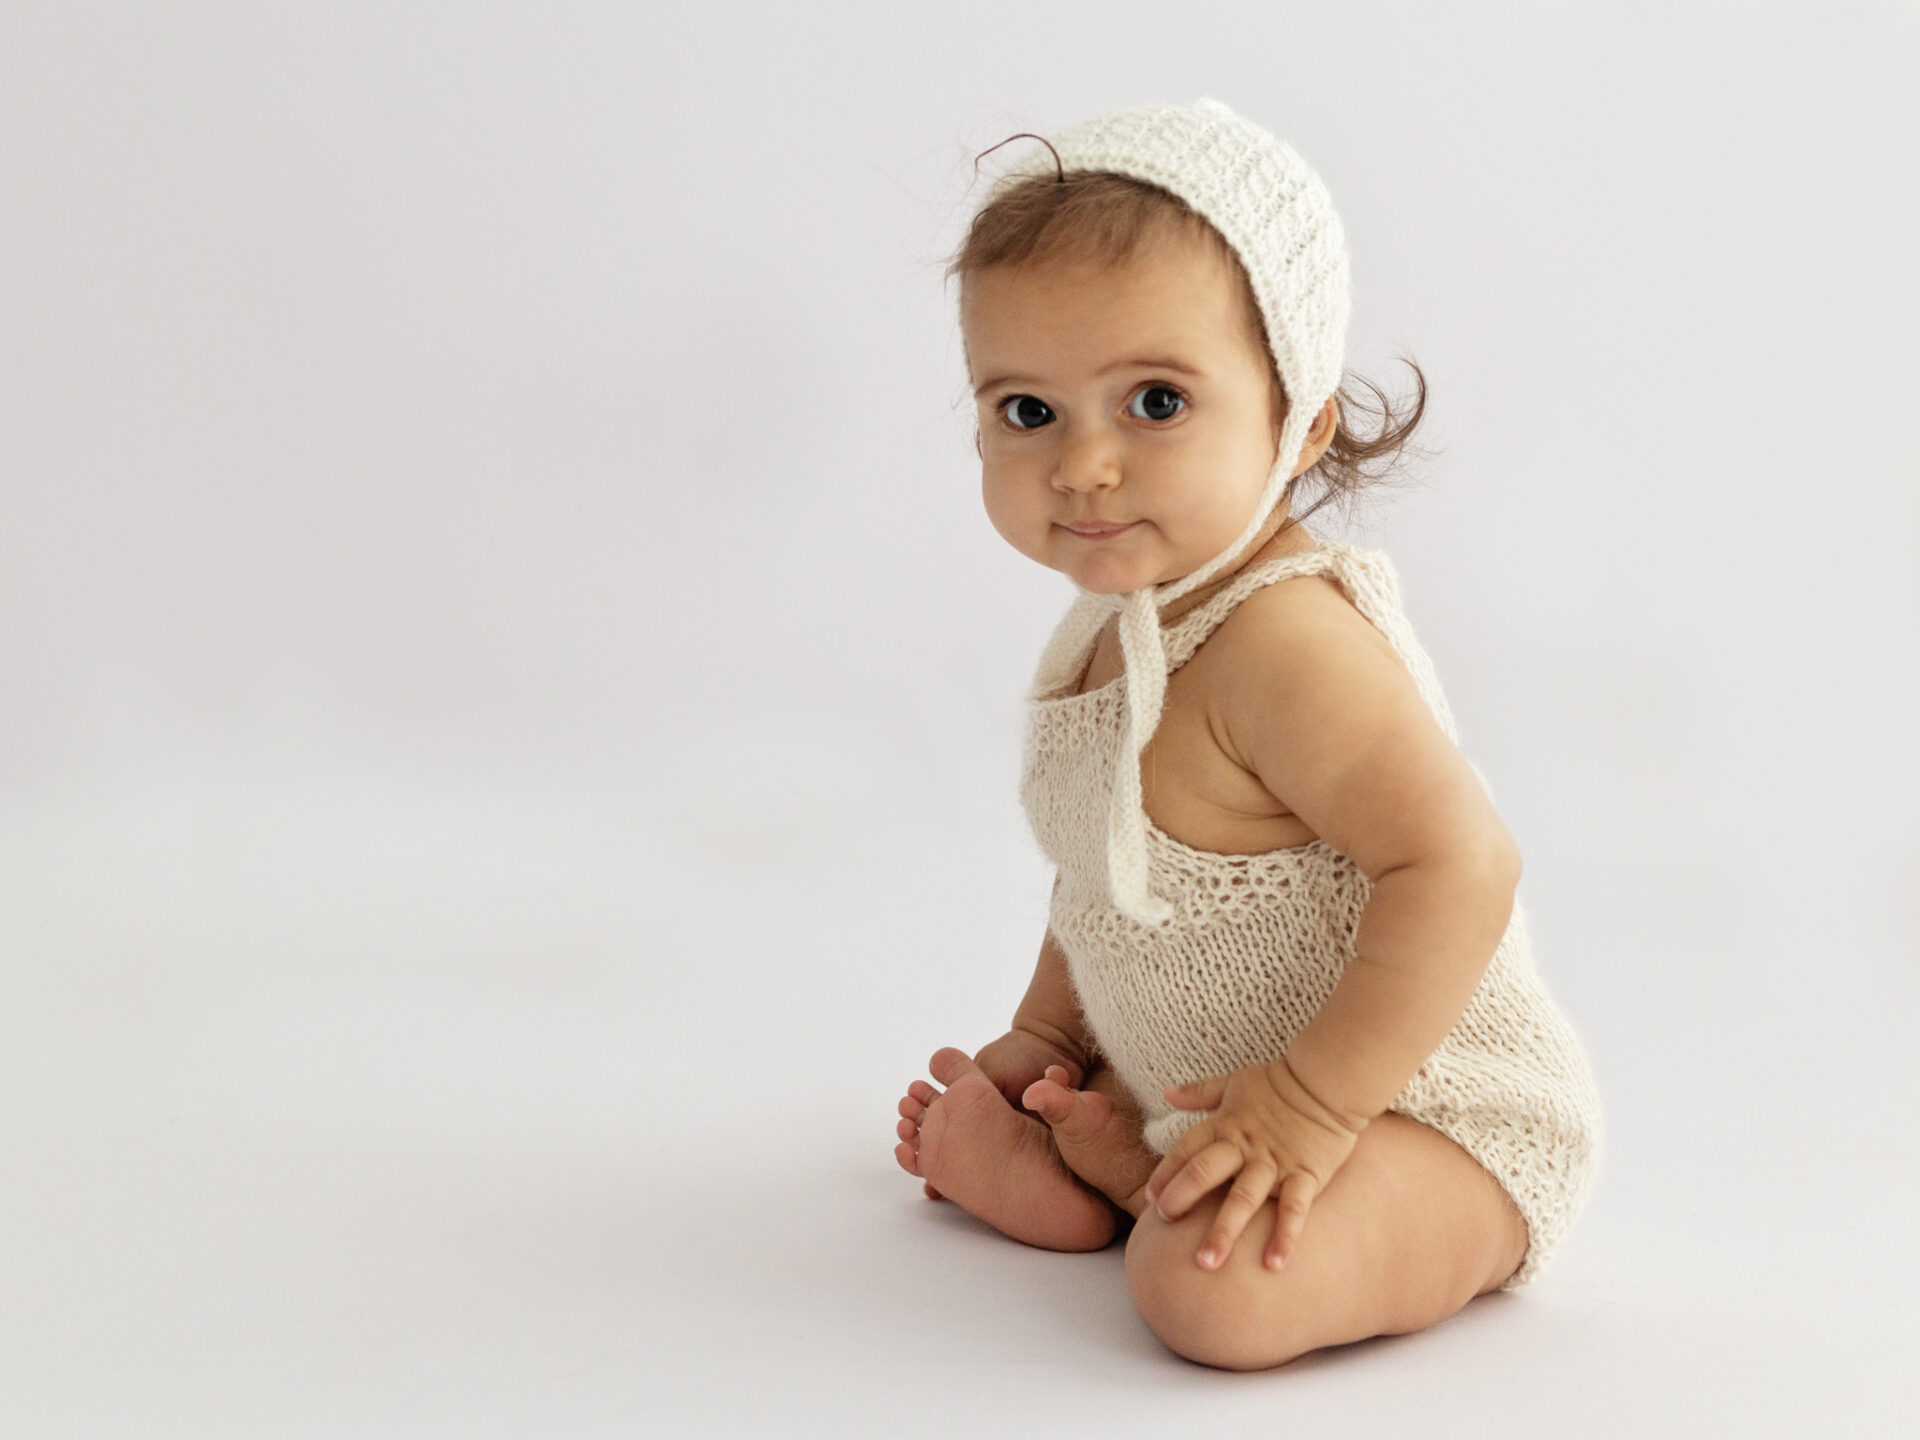 Baby girl with big brown eyes sitting wearing knitted romper and bonnet